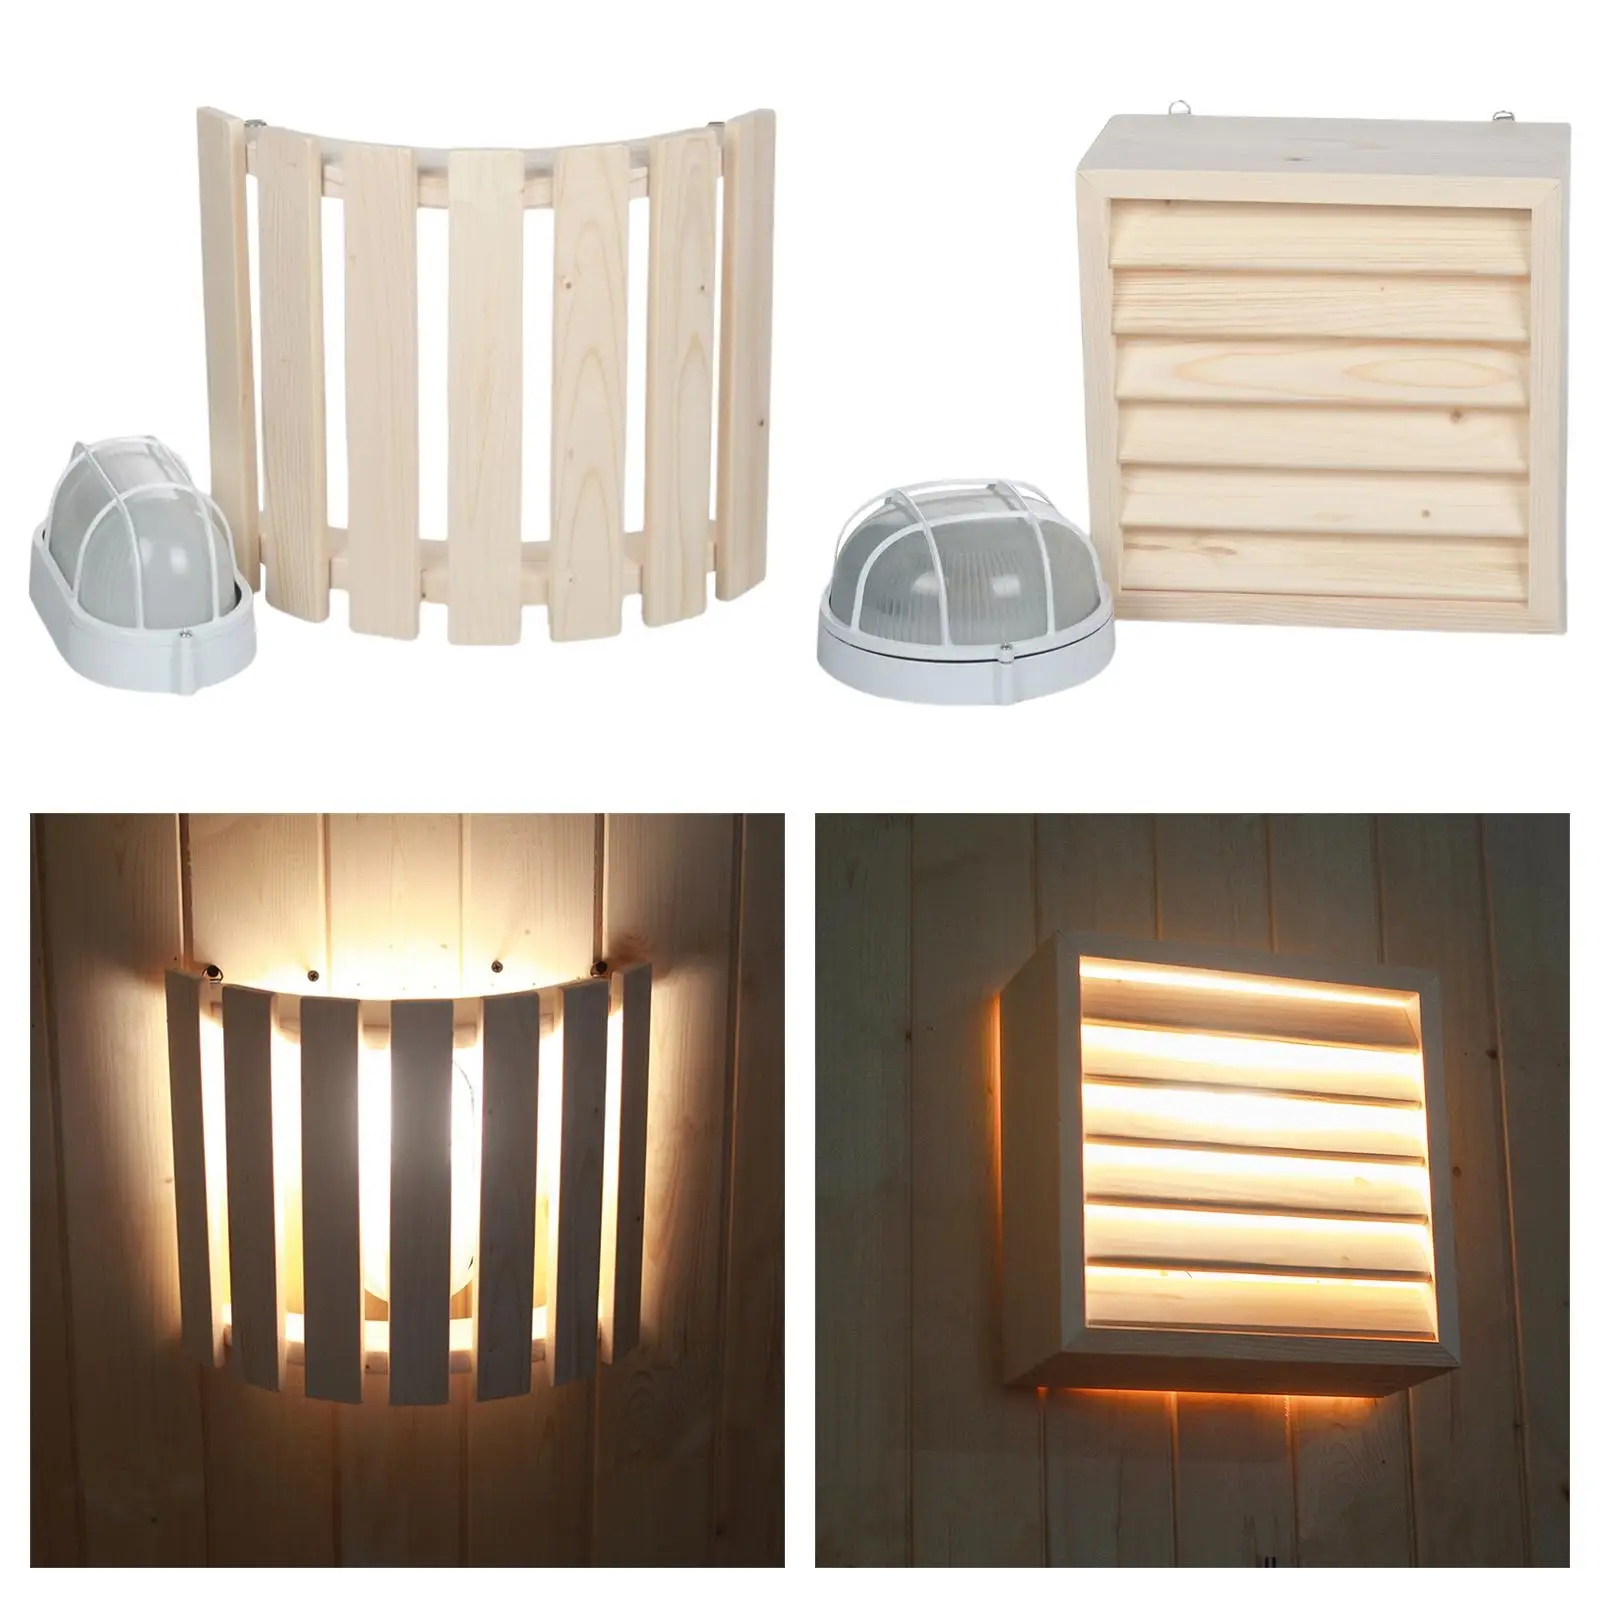 Friendly Wooden Sauna Lamp  Lamp Shade with -Proof Lamp for Sauna Room